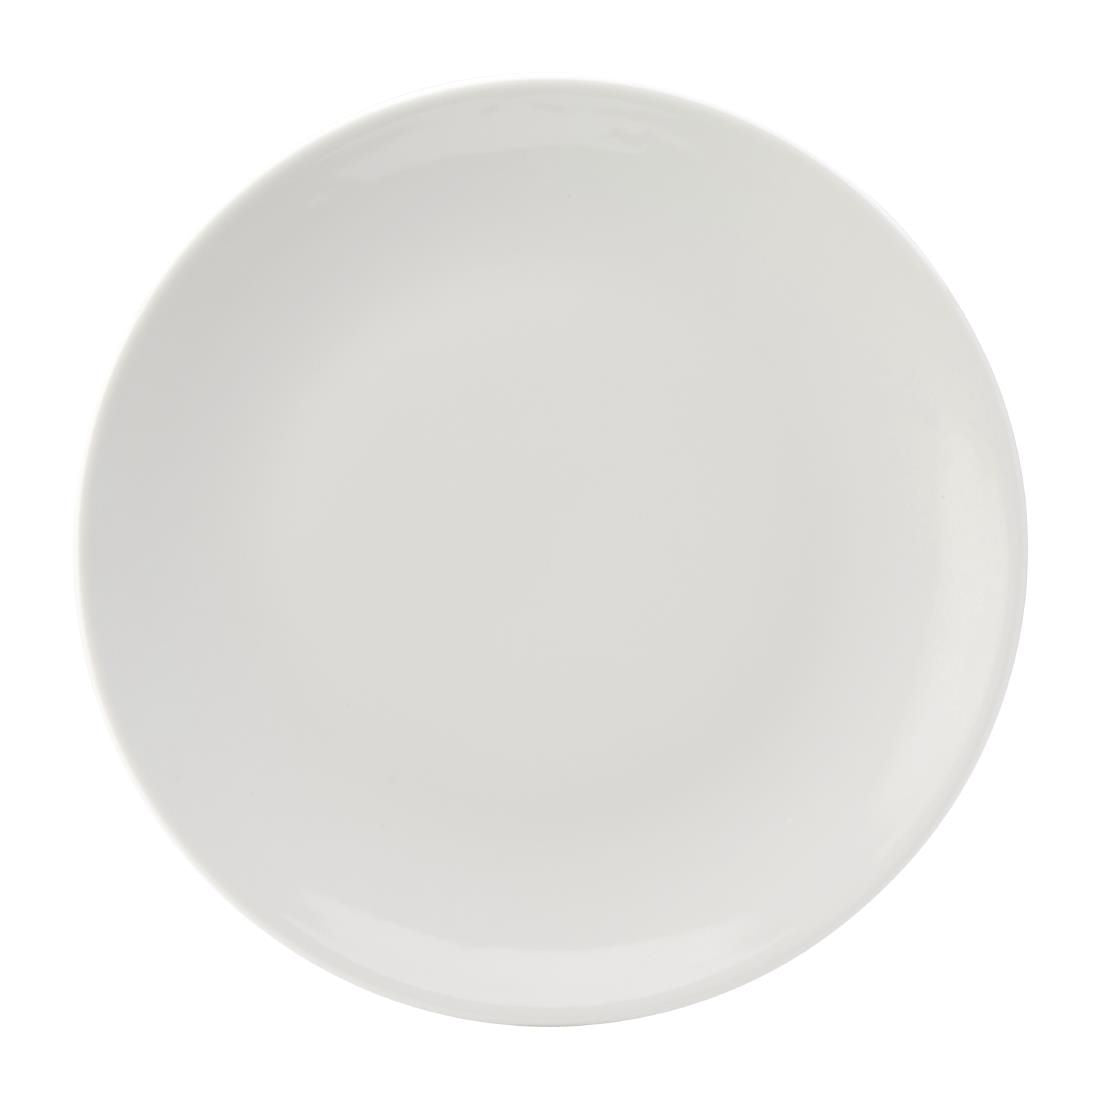 DY353 Utopia Titan Coupe Plates White 280mm (Pack of 6)